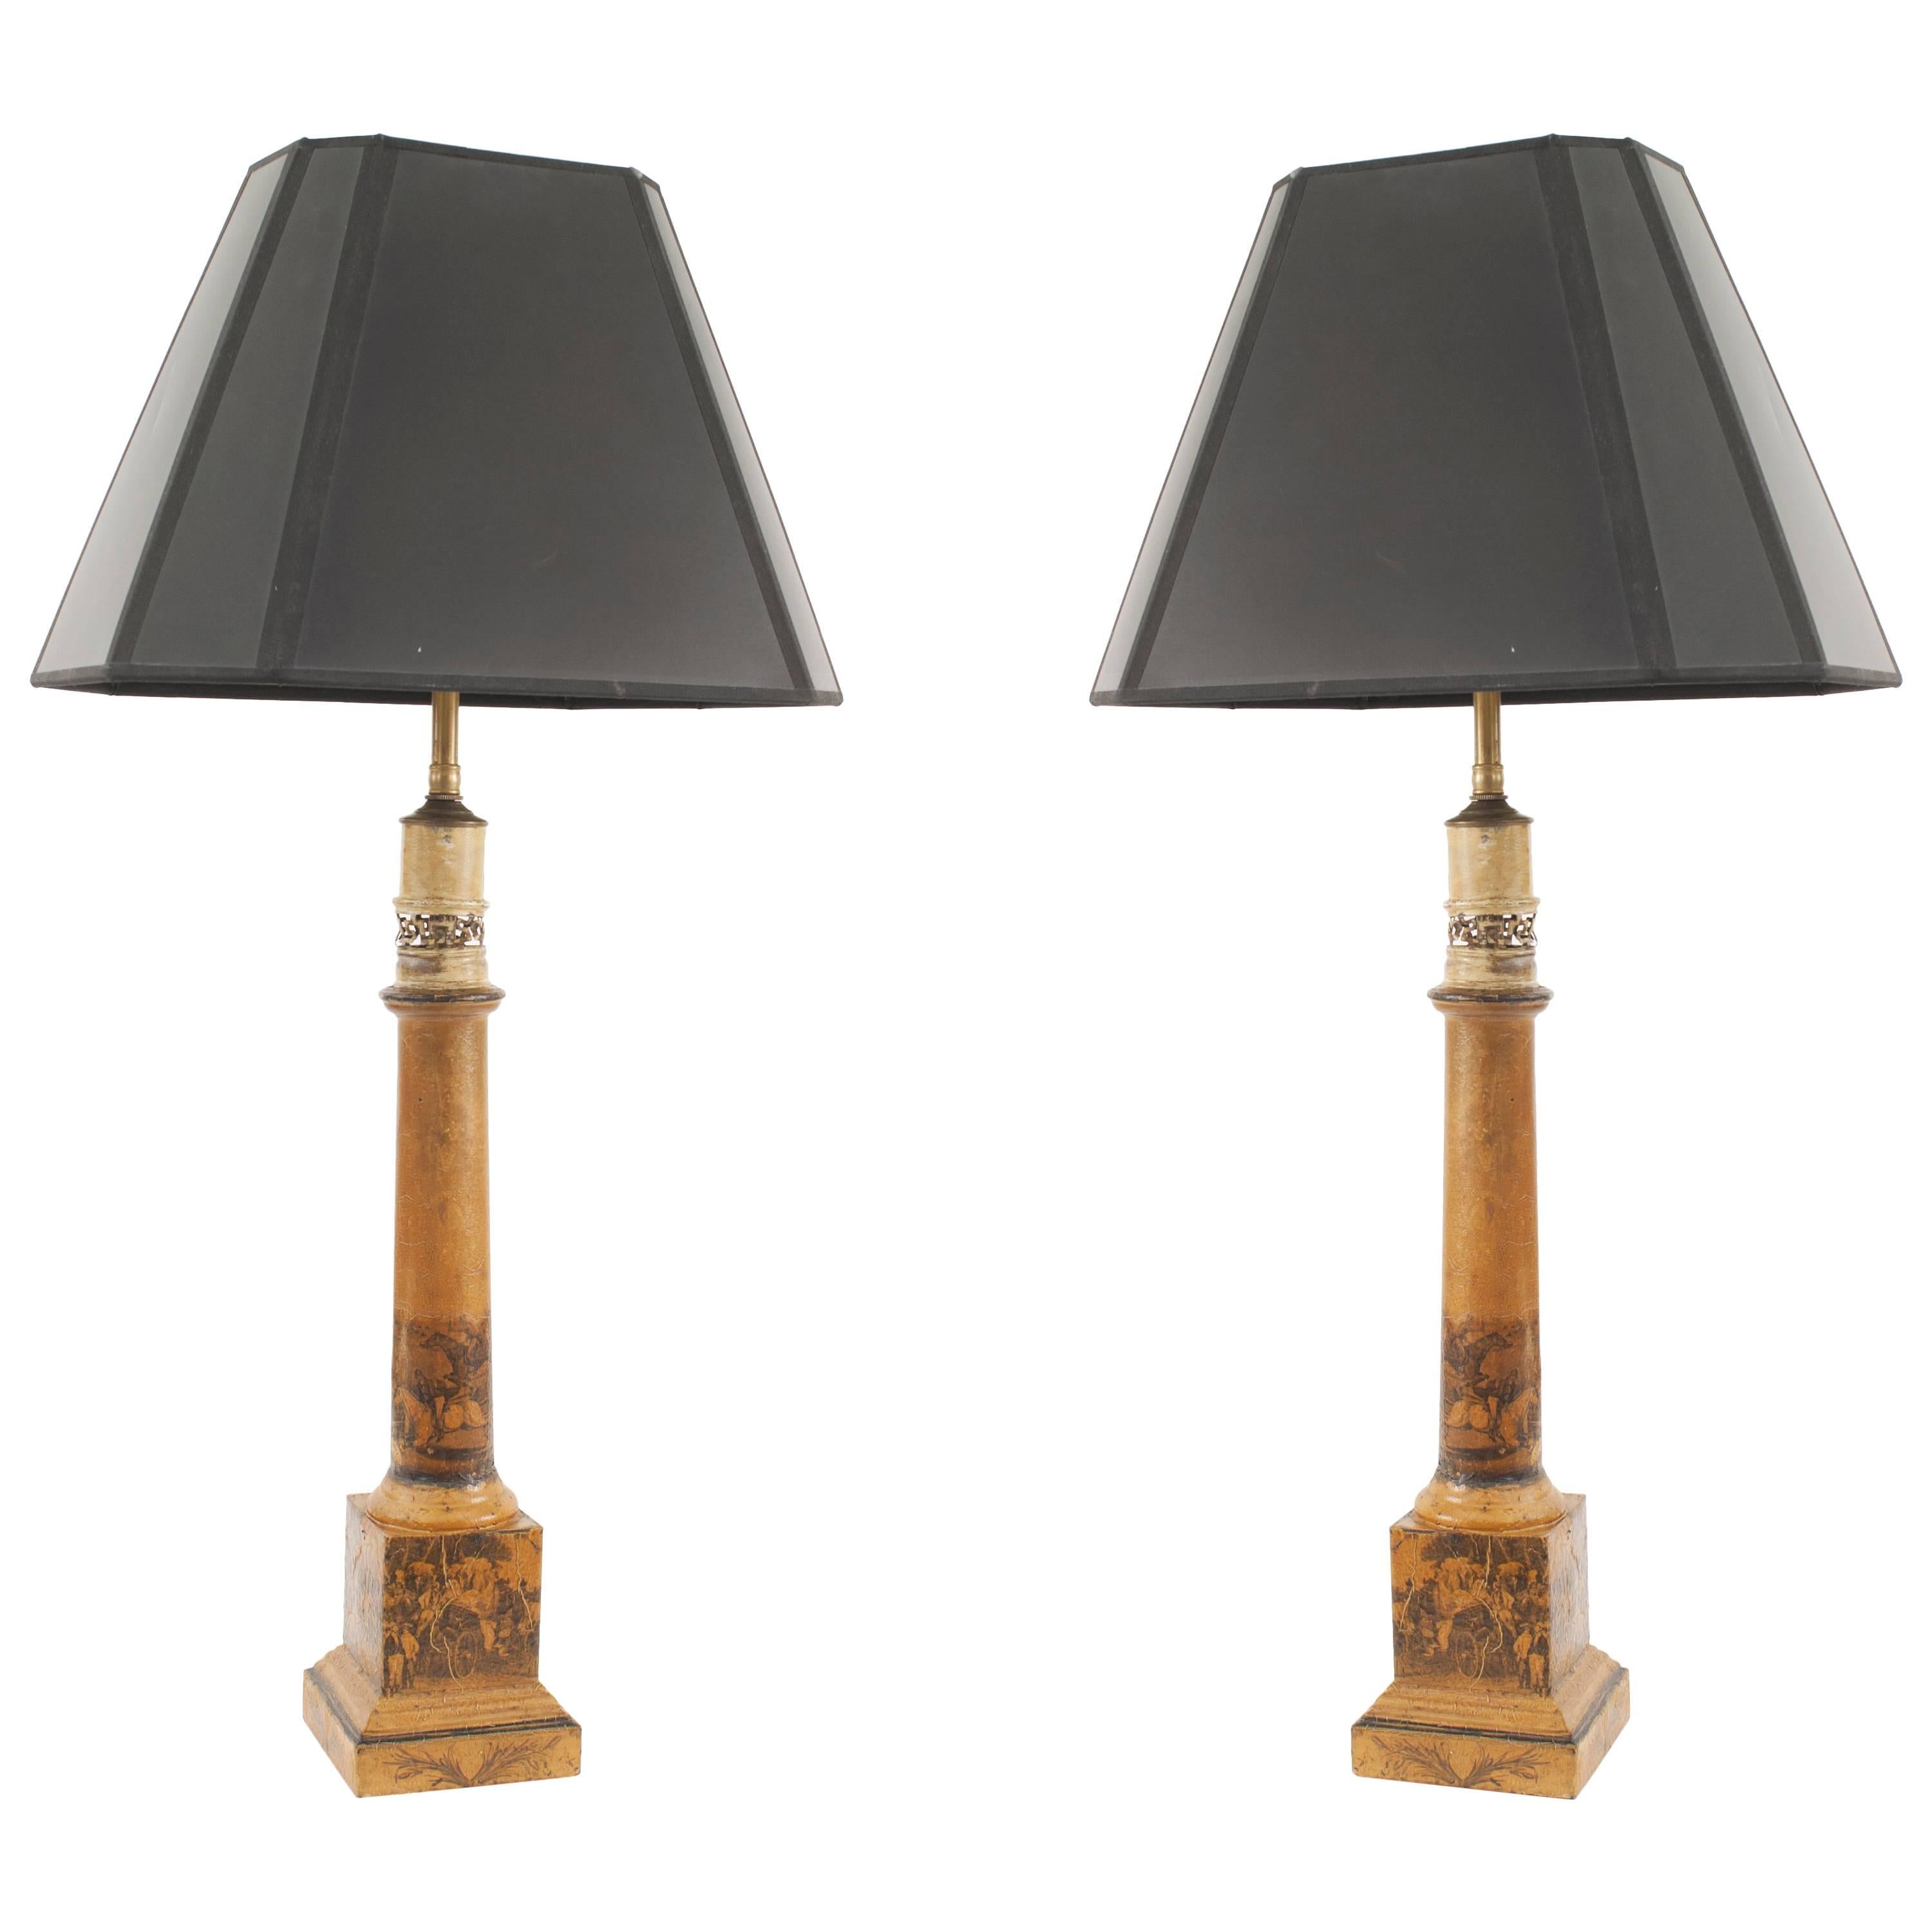 Pair of French Charles X Column Form Table Lamps